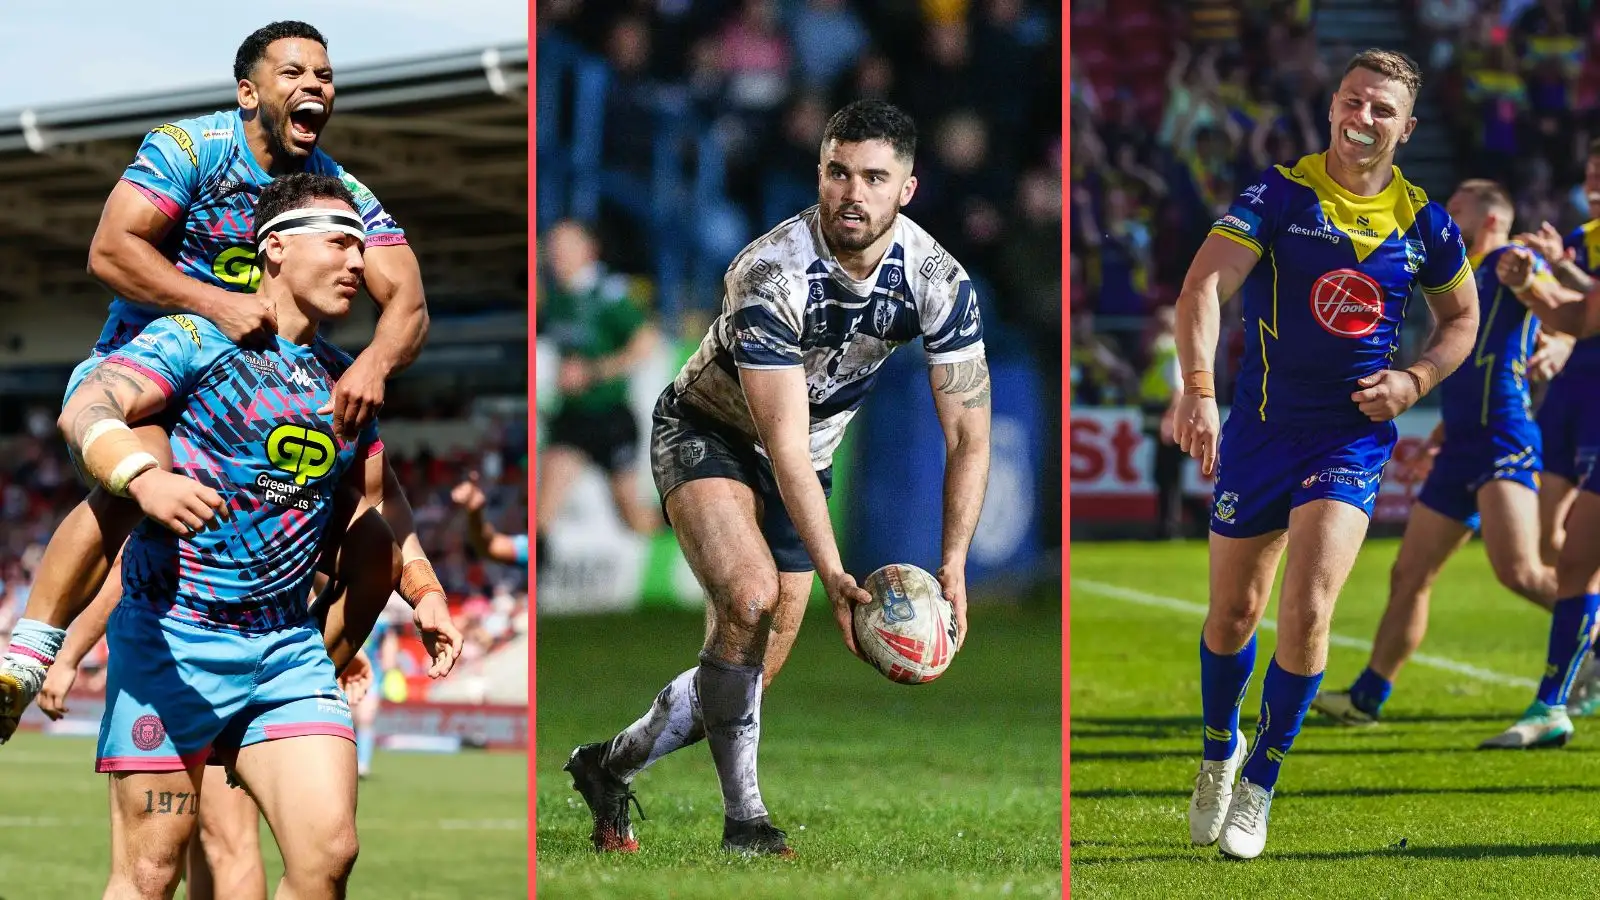 Wigan Warriors, Featherstone Rovers, Warrington Wolves